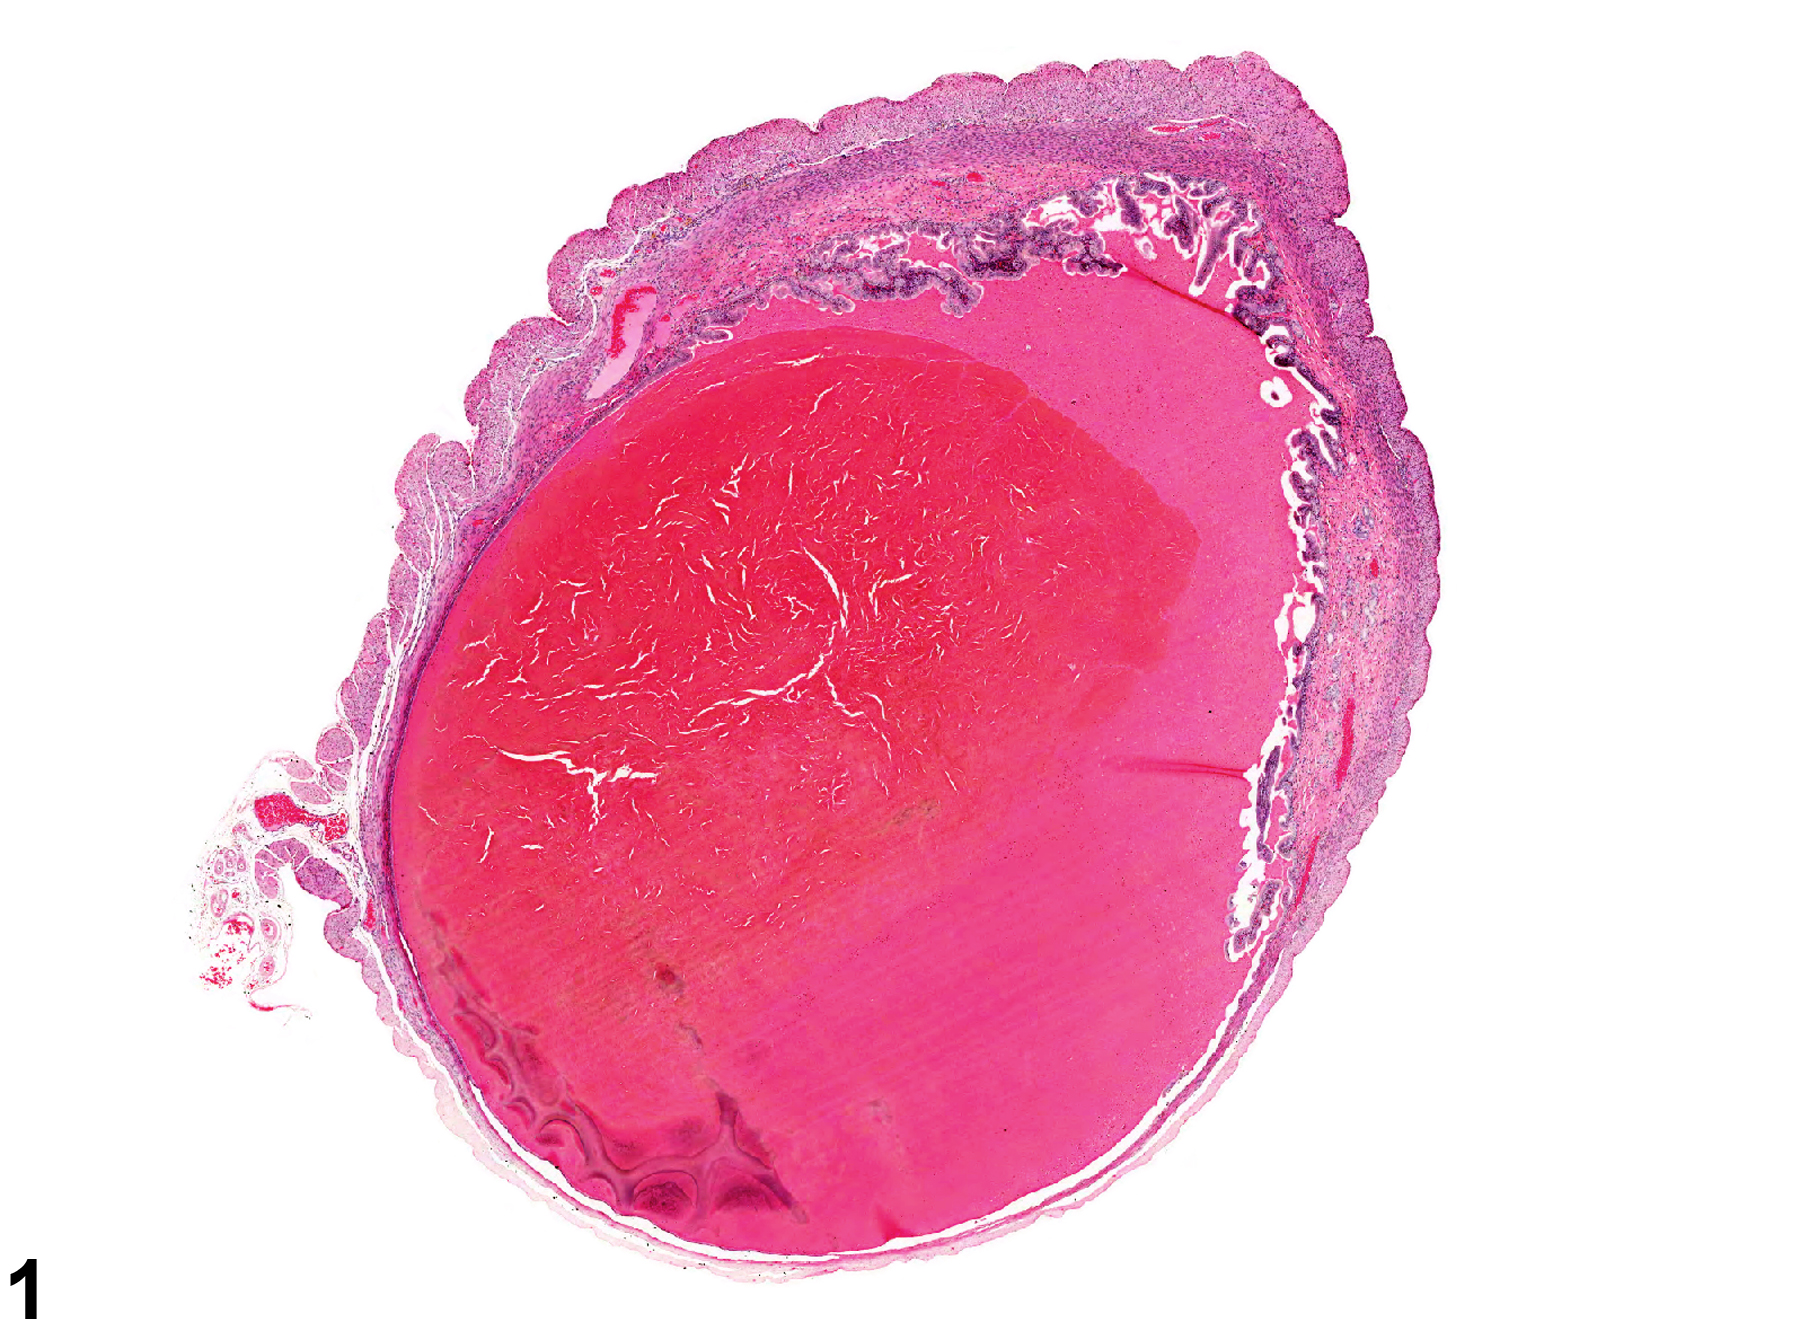 Image of hemorrhage in the uterus from a female F344/N rat in a chronic study